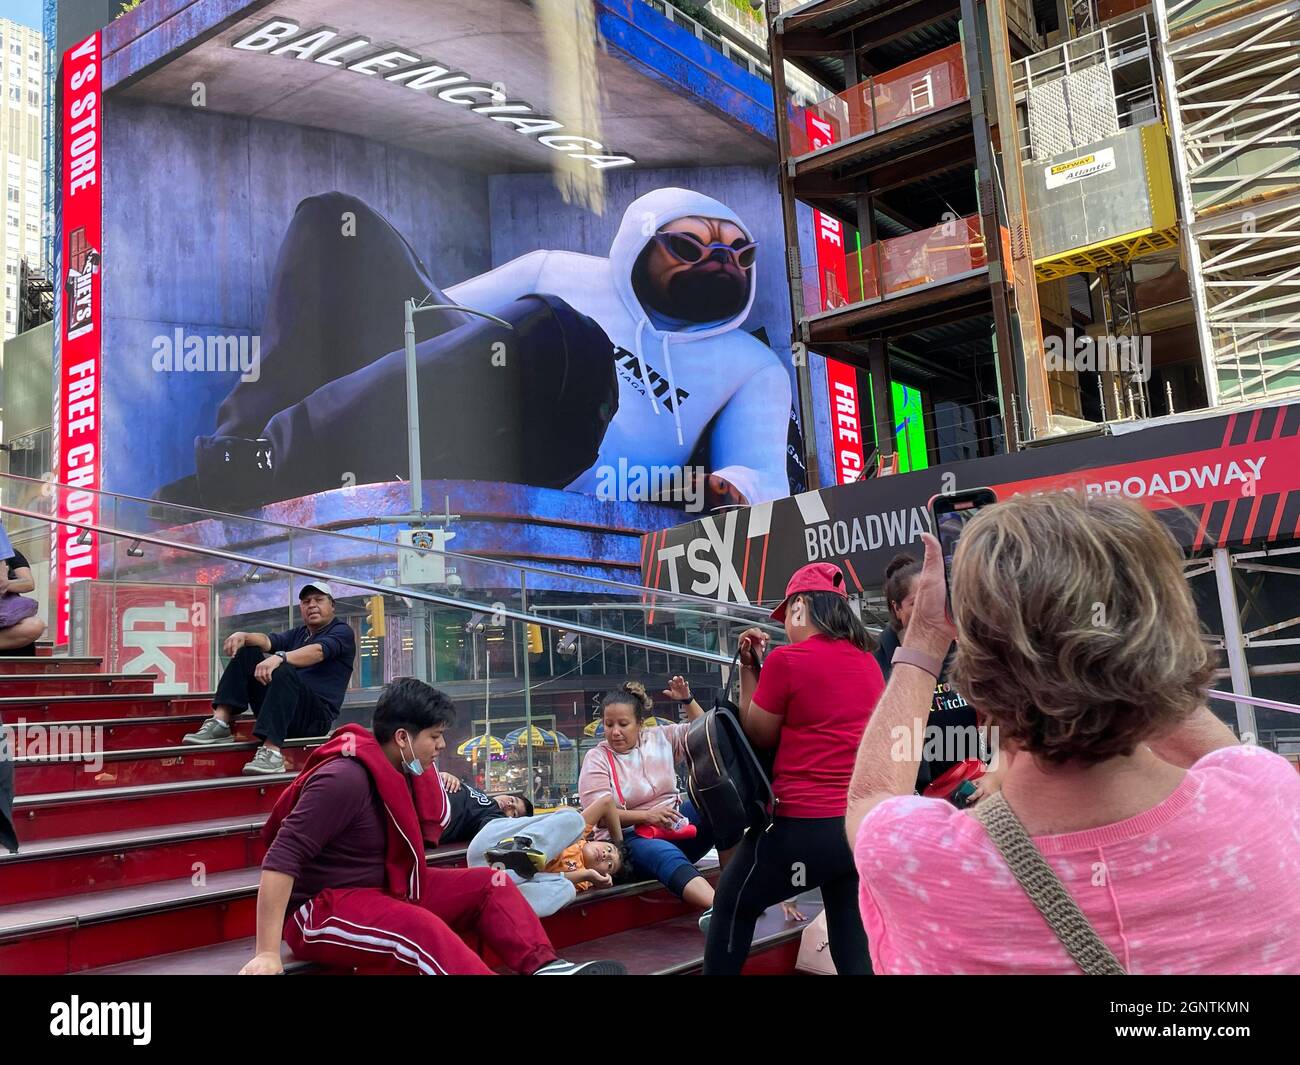 New York NY Sept 27: Balenciaga's 3D Fortnite billboard in Times Square NYC  Credit: Rainmaker/MediaPunch Stock Photo - Alamy